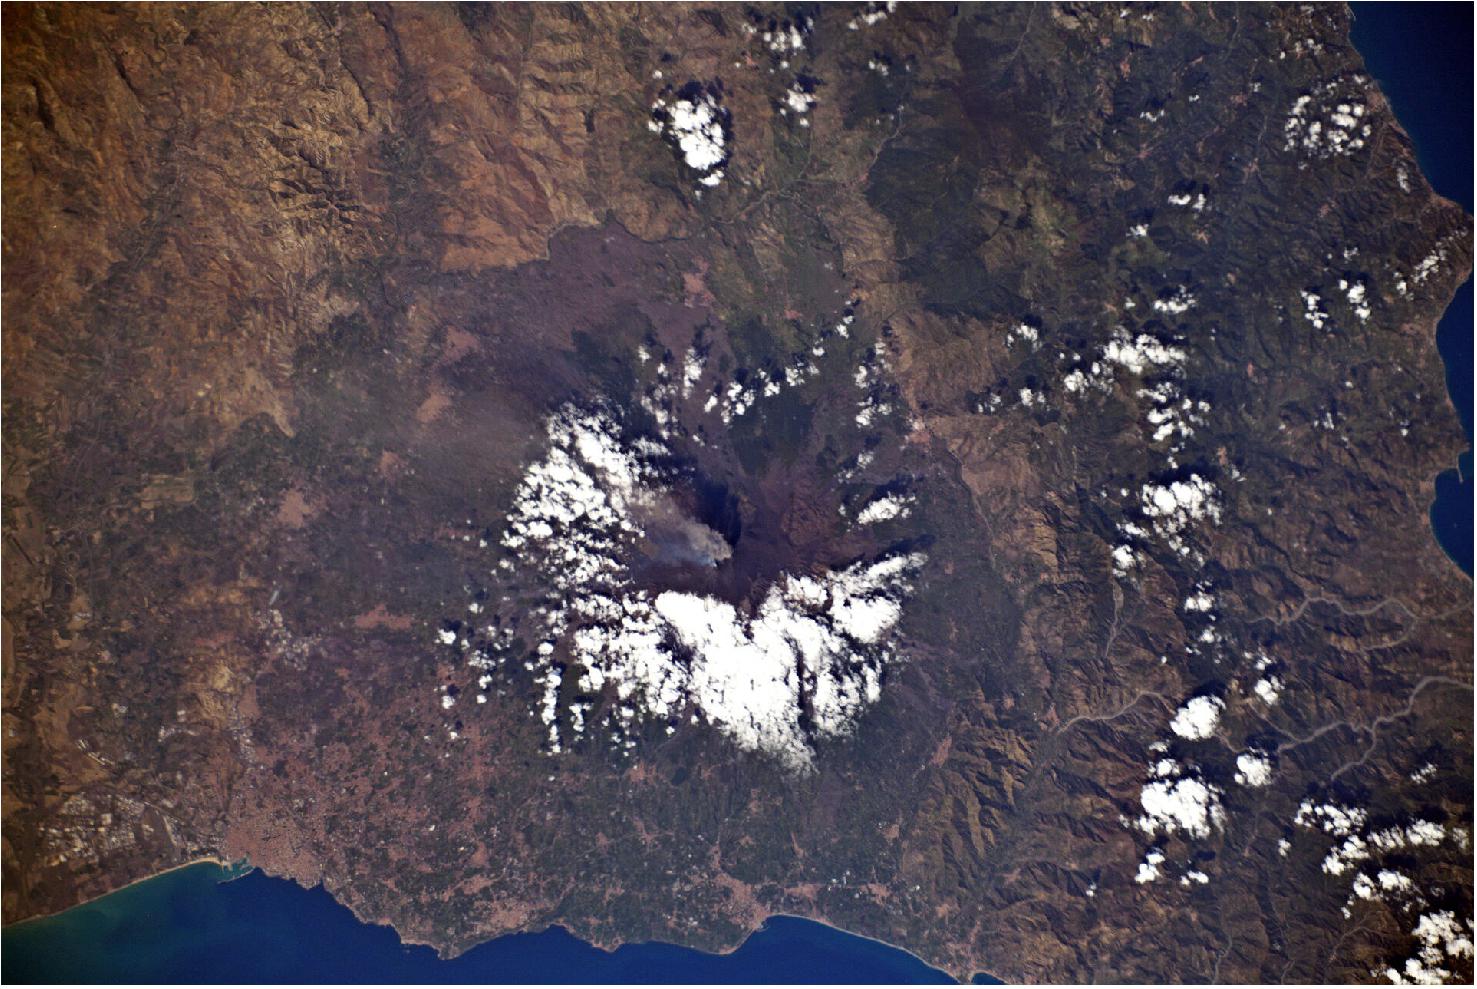 Figure 7: Mount Etna erupting. ESA astronaut Luca Parmitano captured this image of Mount Etna erupting from the International Space Station. Etna is an active stratovolcano on the east coast of Sicily, Italy. Luca was launched to the International Space Station for his second mission, Beyond, on 20 July 2019. He will spend six months living and working on the orbital outpost where he will support more than 50 European experiments and more than 200 international experiments in space (image credit: ESA/NASA-L. Parmitano)